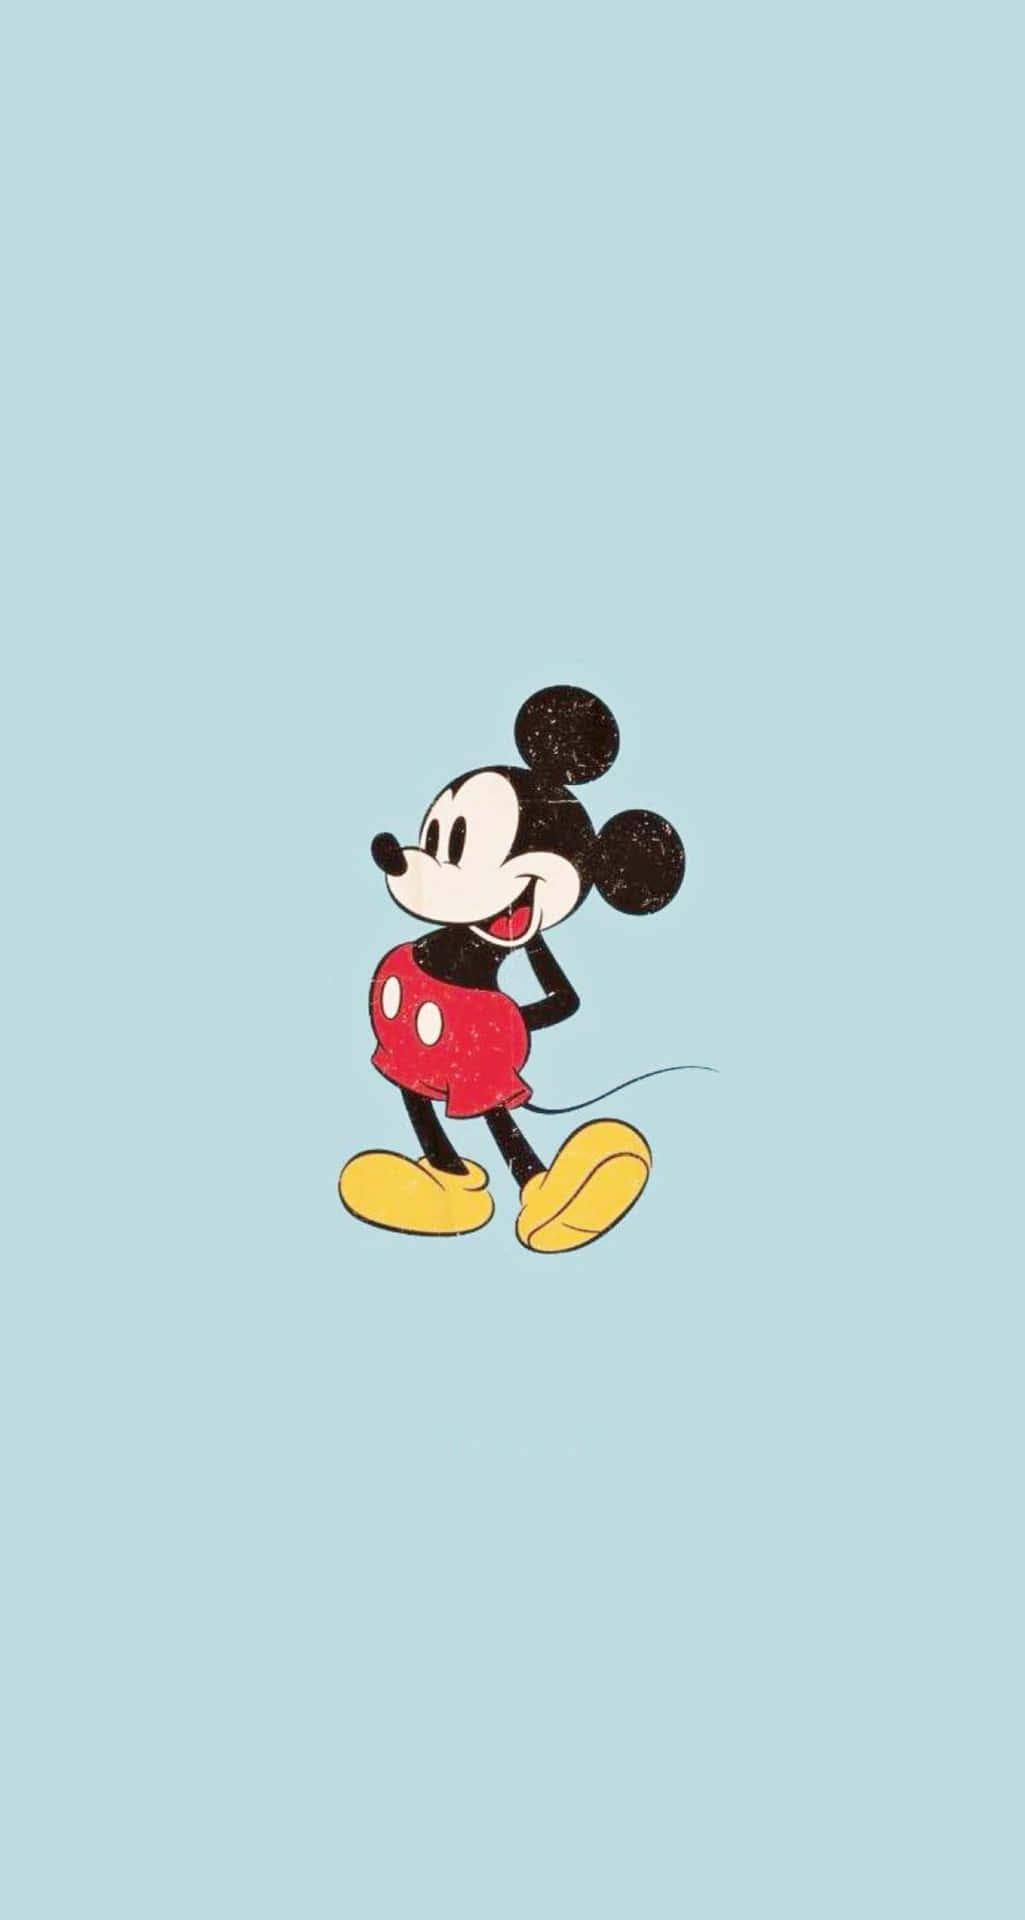 “make Way For The Cutest Mouse In Town - Adorable Mickey Mouse!”